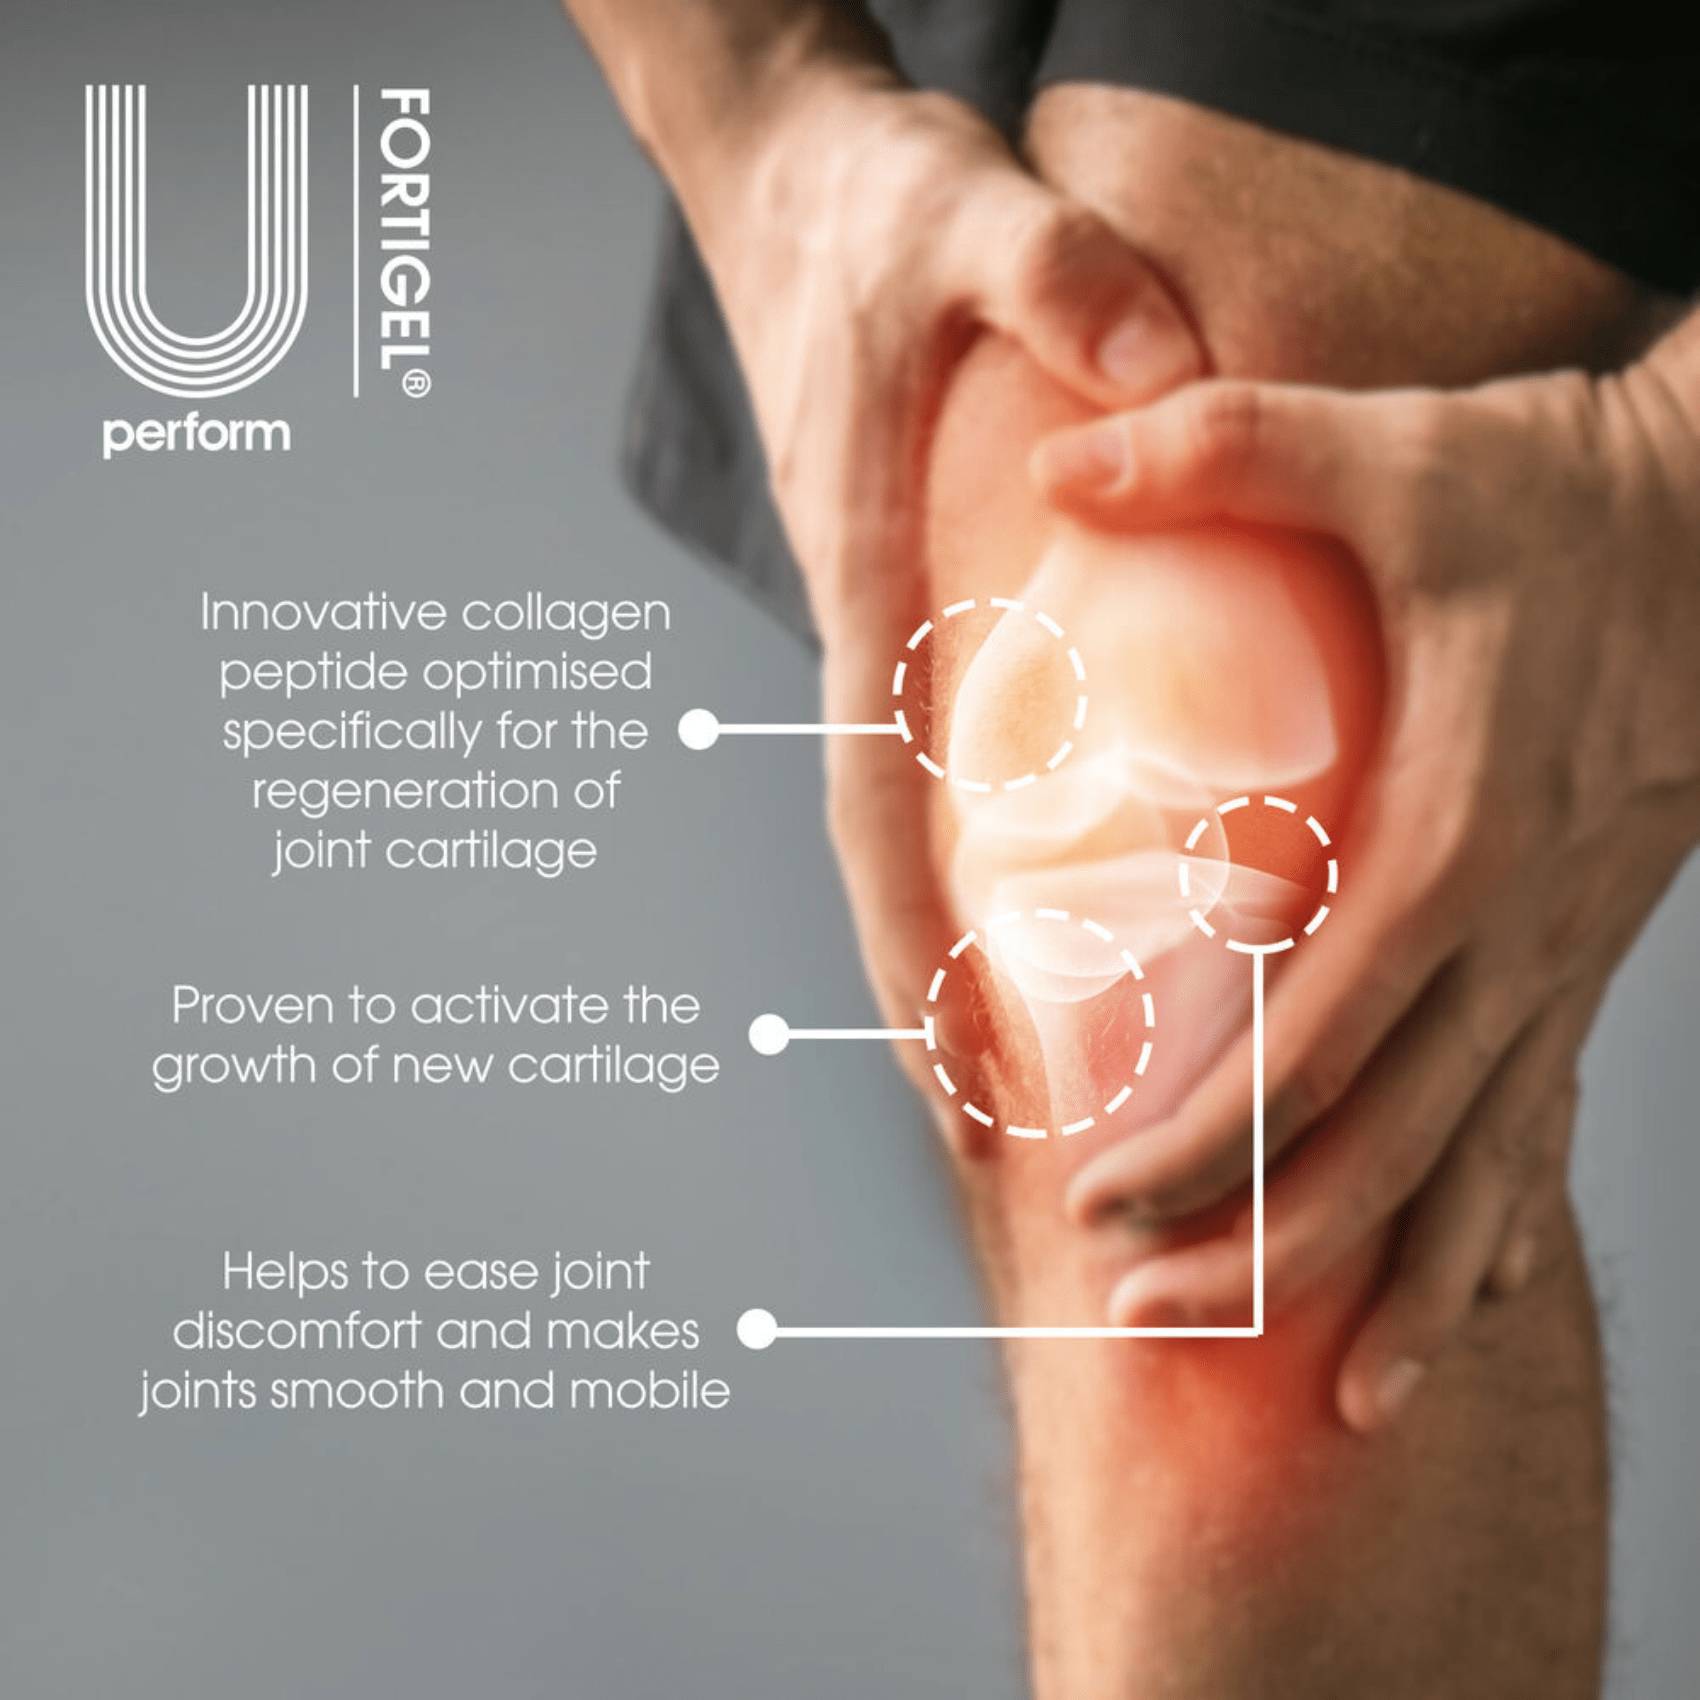 man in black sports shorts holding knee joint with inflammation and graphics and text showing features and benefits of U Perform FORTIGEL Bioactive Collagen Peptides